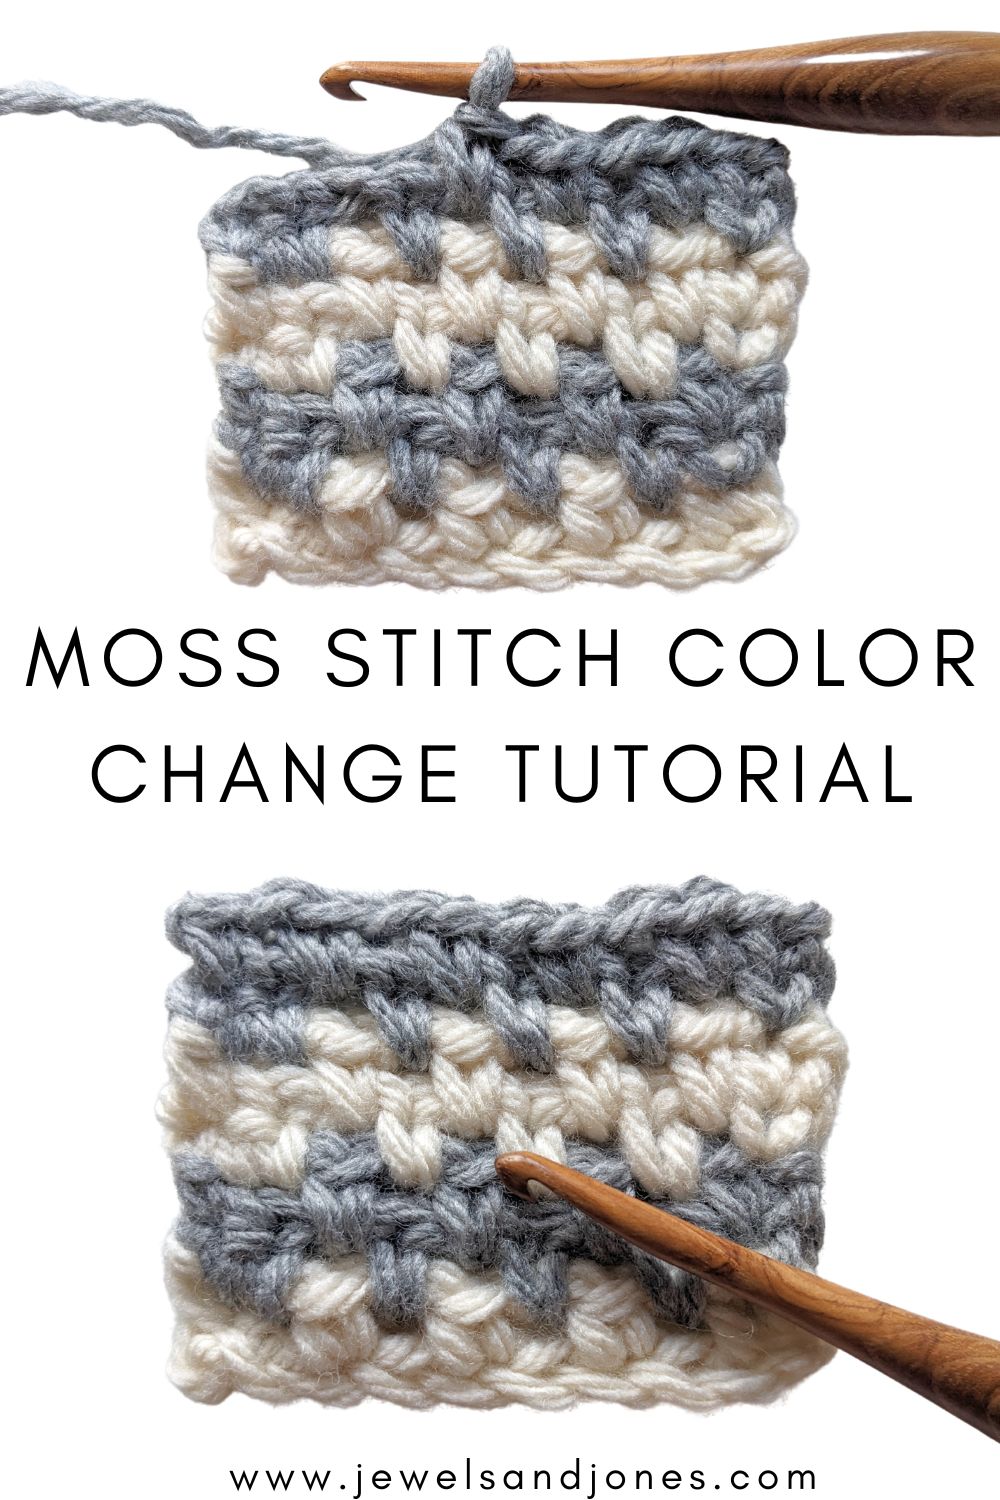 A tutorial on how to change colors when making the crochet moss stitch.